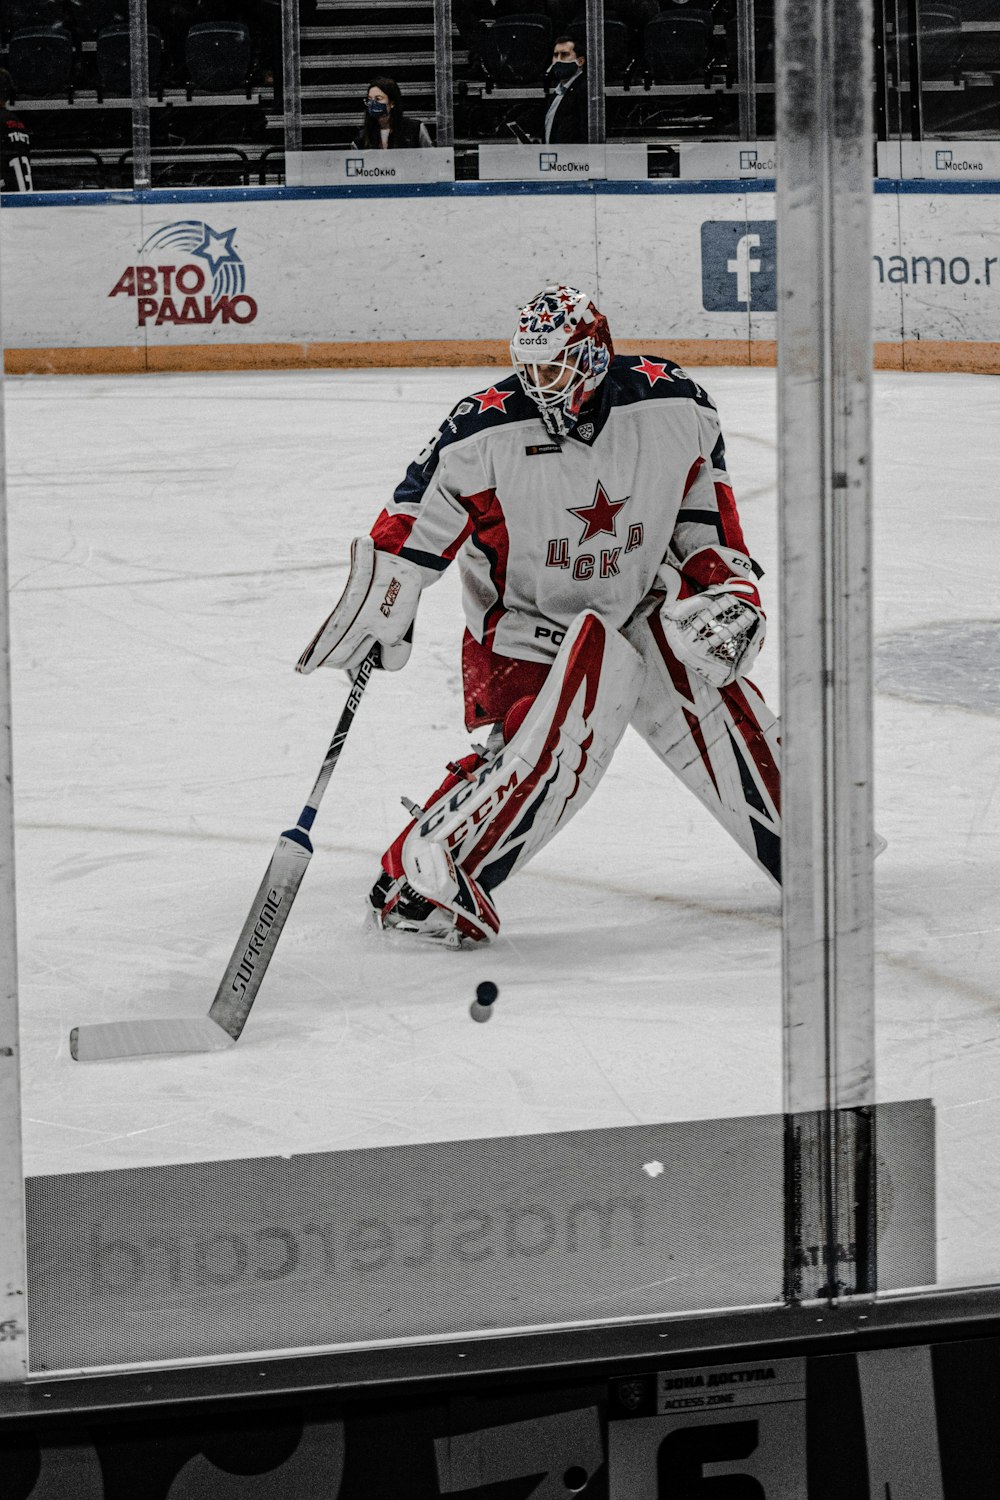 man in red and white ice hockey jersey riding on hockey stick